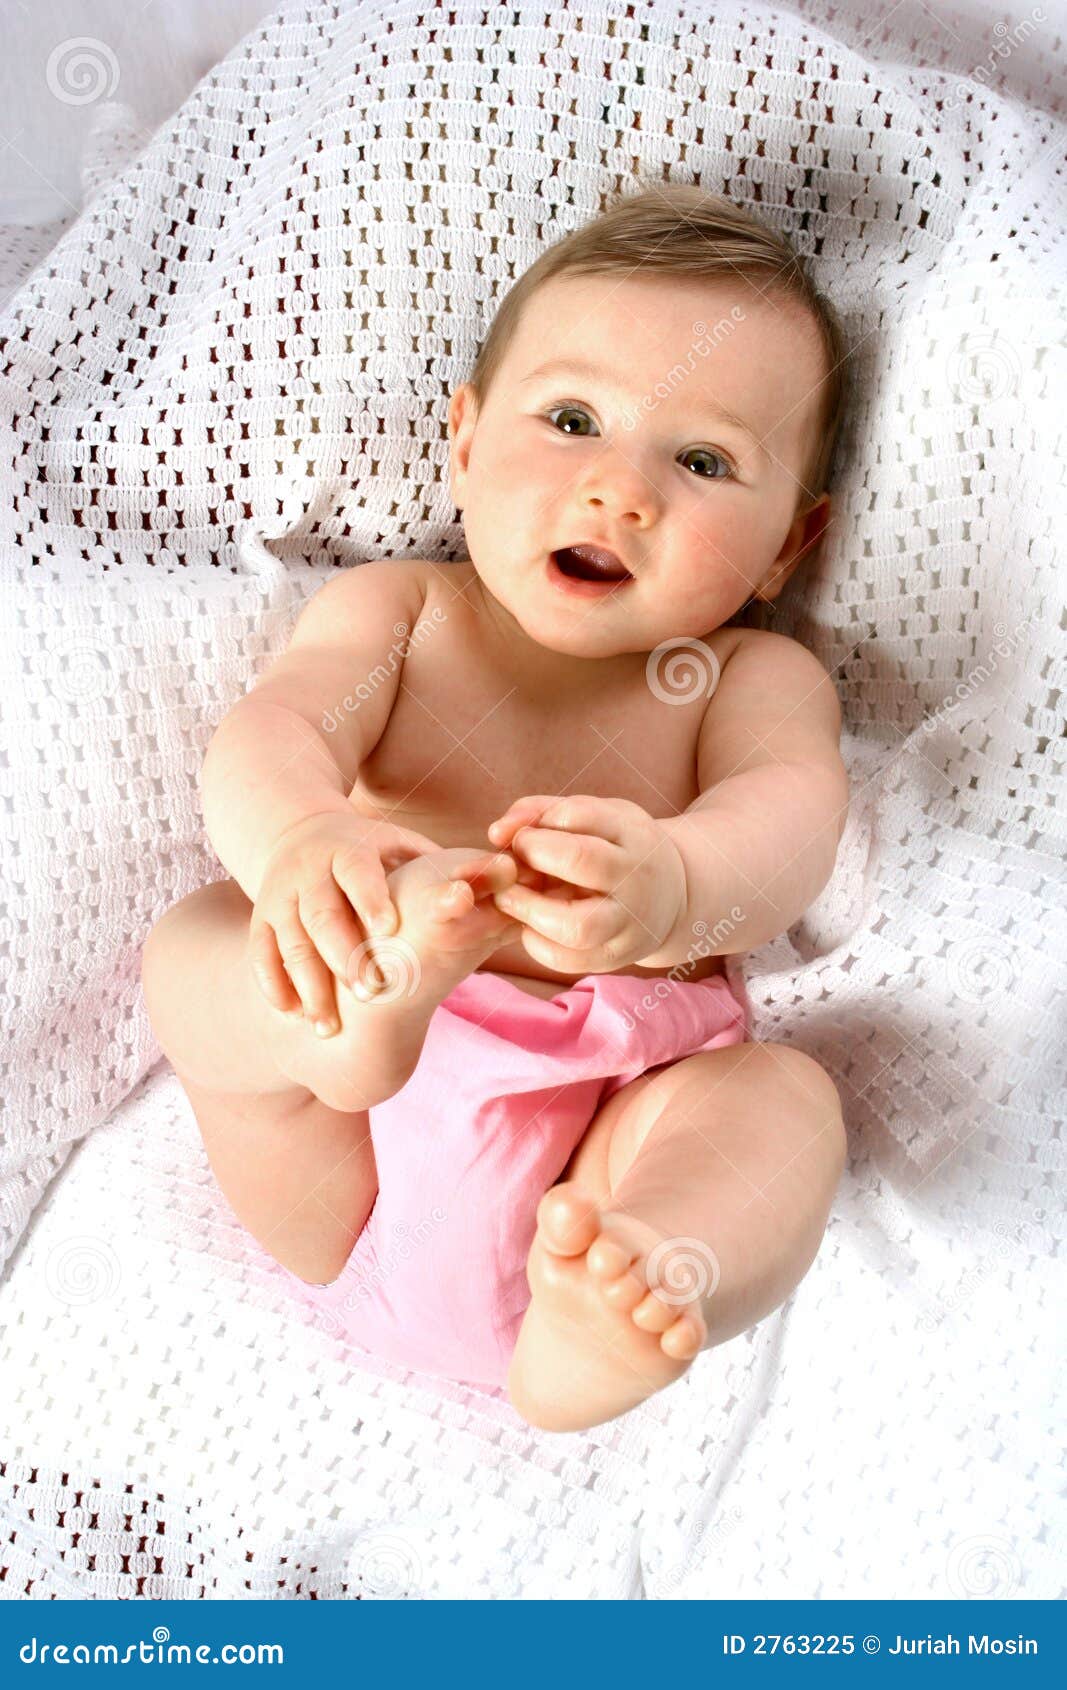 Bouncing Baby Play with Toes Stock Image - Image of infant